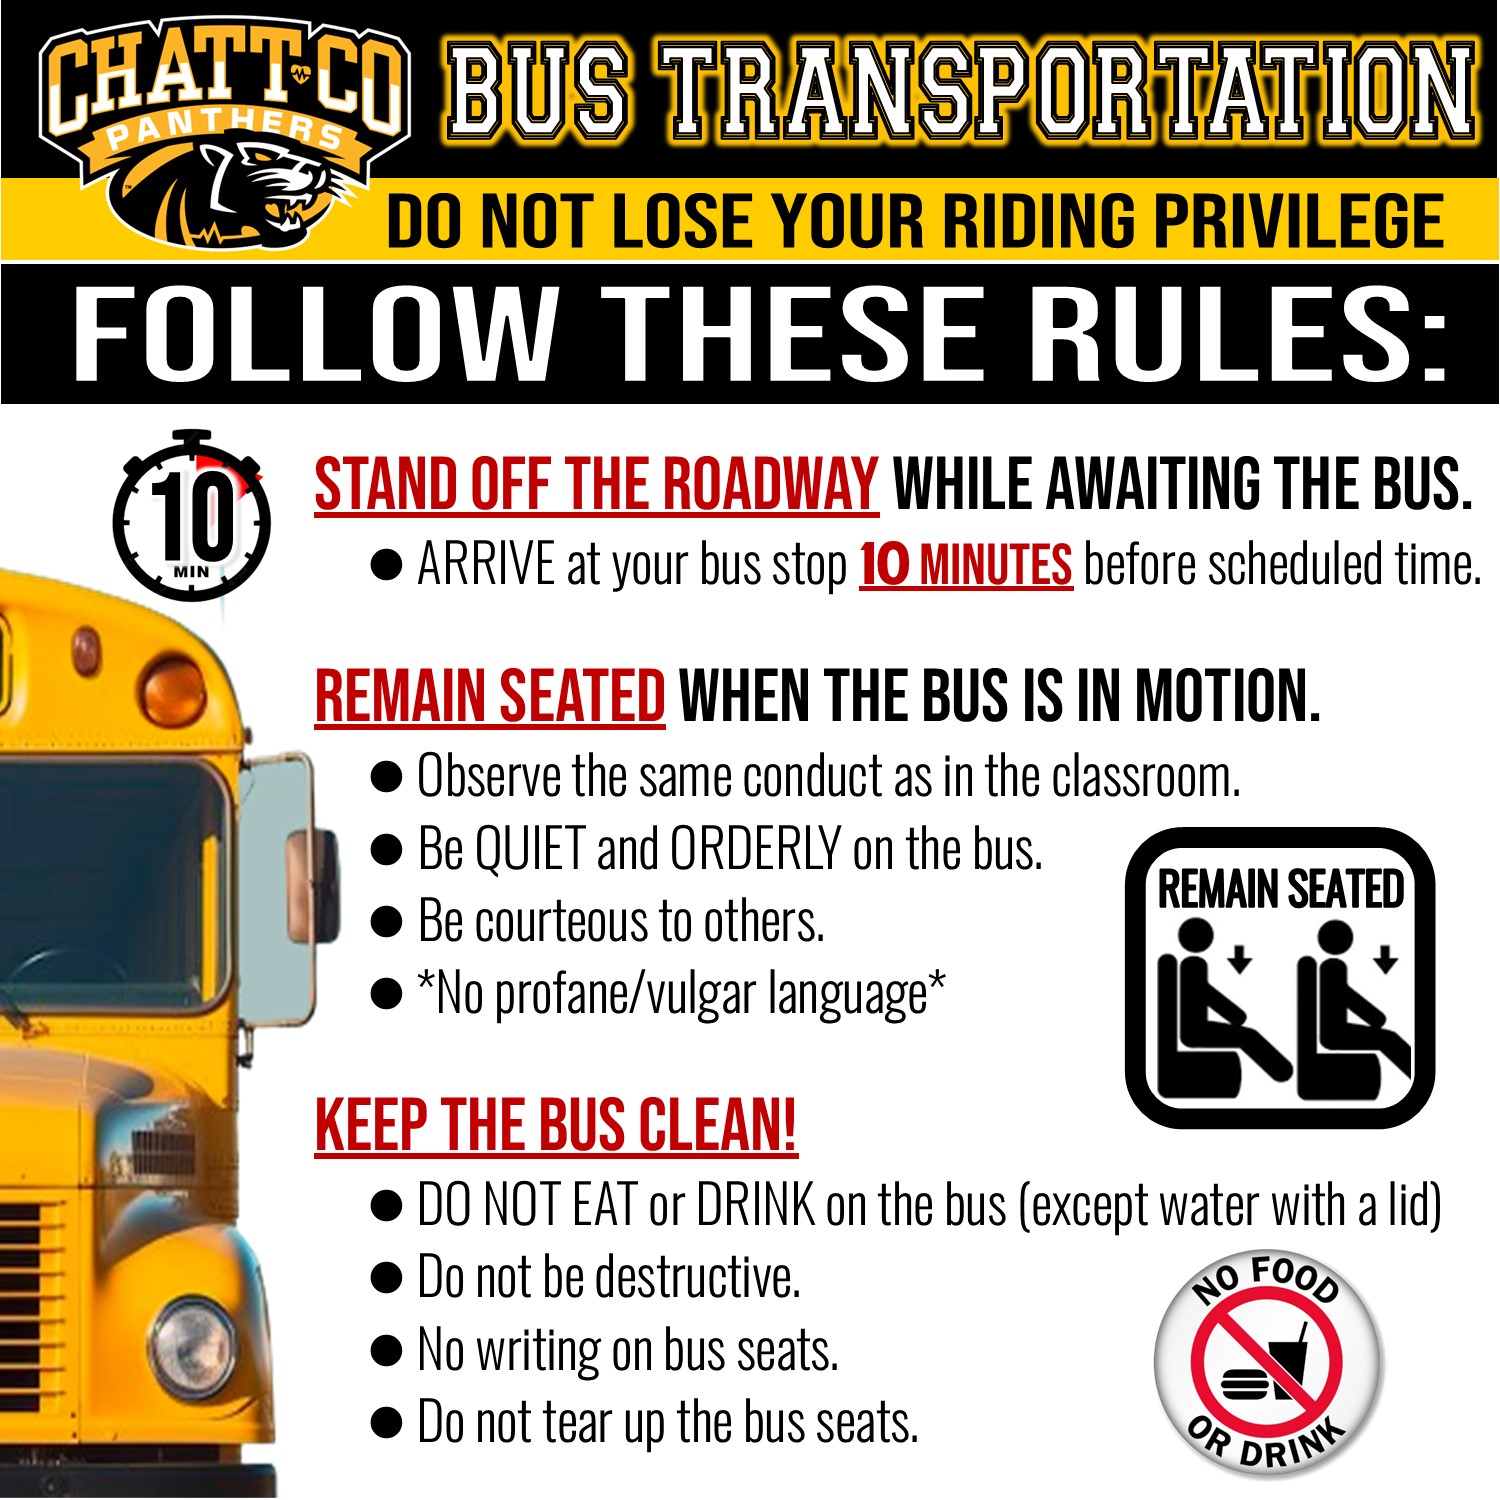 Bus Transportation. Do not lose your riding priviledge. Follow these rules: Stand off the roadway while awaiting the bus. Arrive at your bus stop 10 minutes before scheduled time. Remain seated when the bus is in motion. Observe the same conduct as in the classroom. Be QUIET and ORDERLY on the bus. Be courteous to others. *No profane/vulgar language* Keep the Bus Clean! Only water in a cup/bottle with a lid is allowed. *Other food and drinks are prohibited. Be respectful of the bus property. Take pride in the bus by protecting the seats from damage